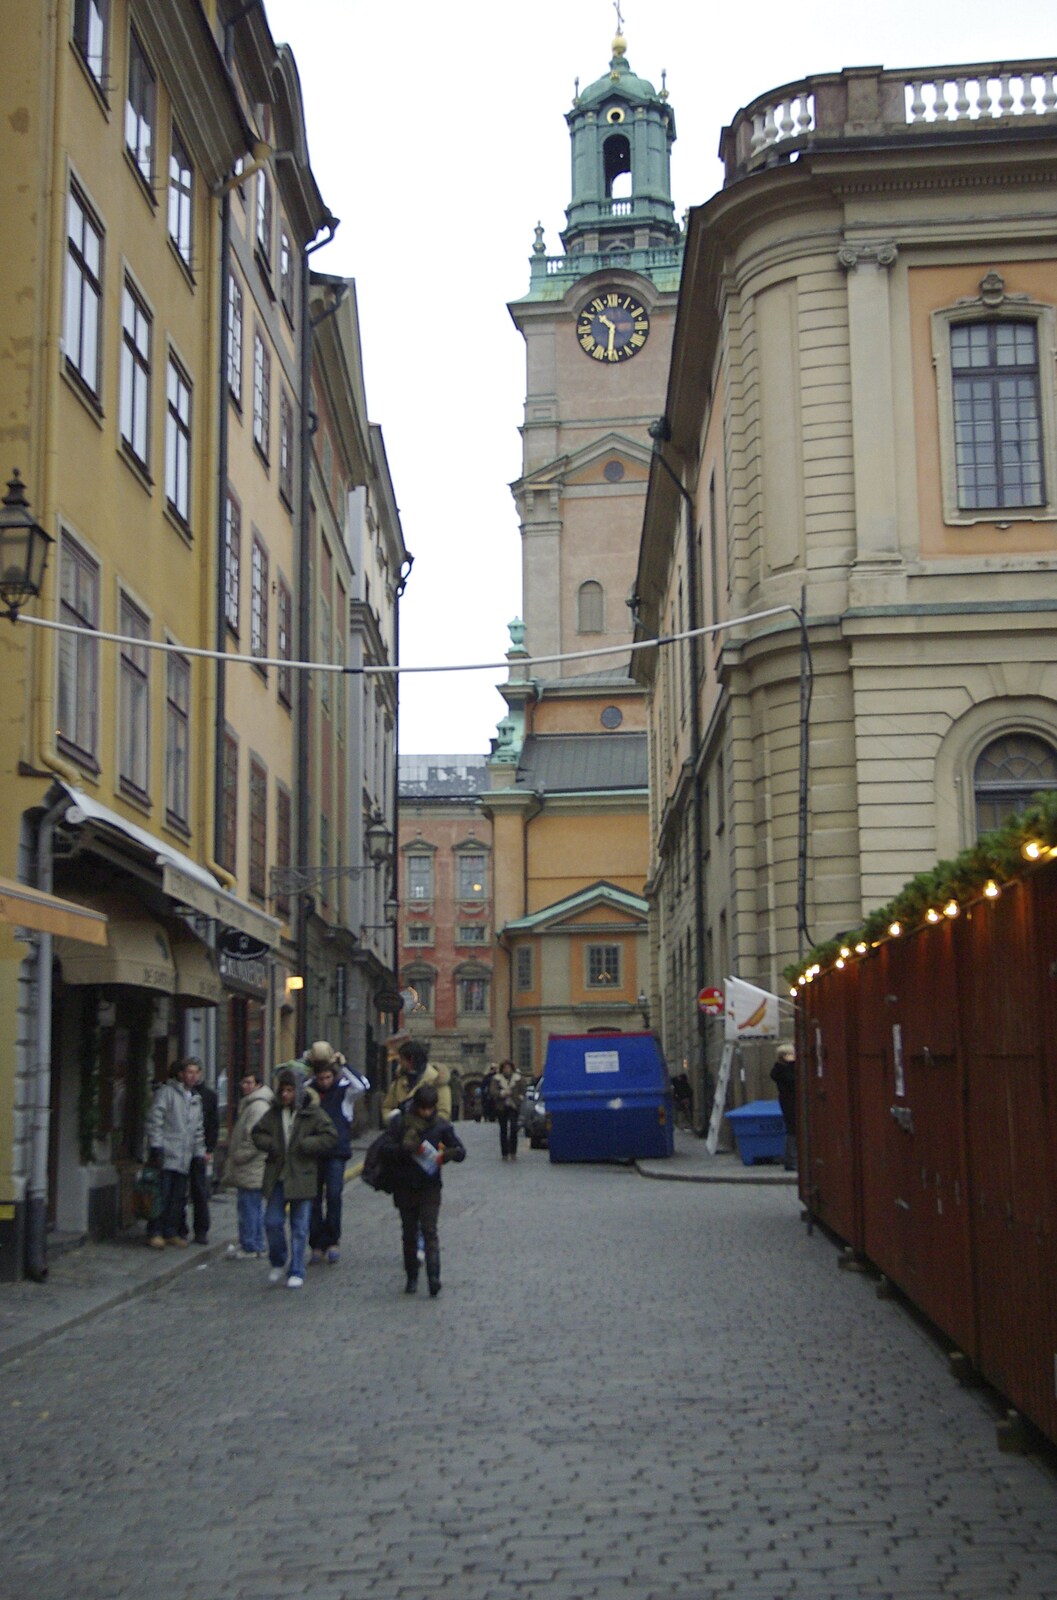 An alley in Gamla Stan, Stockholm from Gamla Stan, Stockholm, Sweden - 15th December 2007